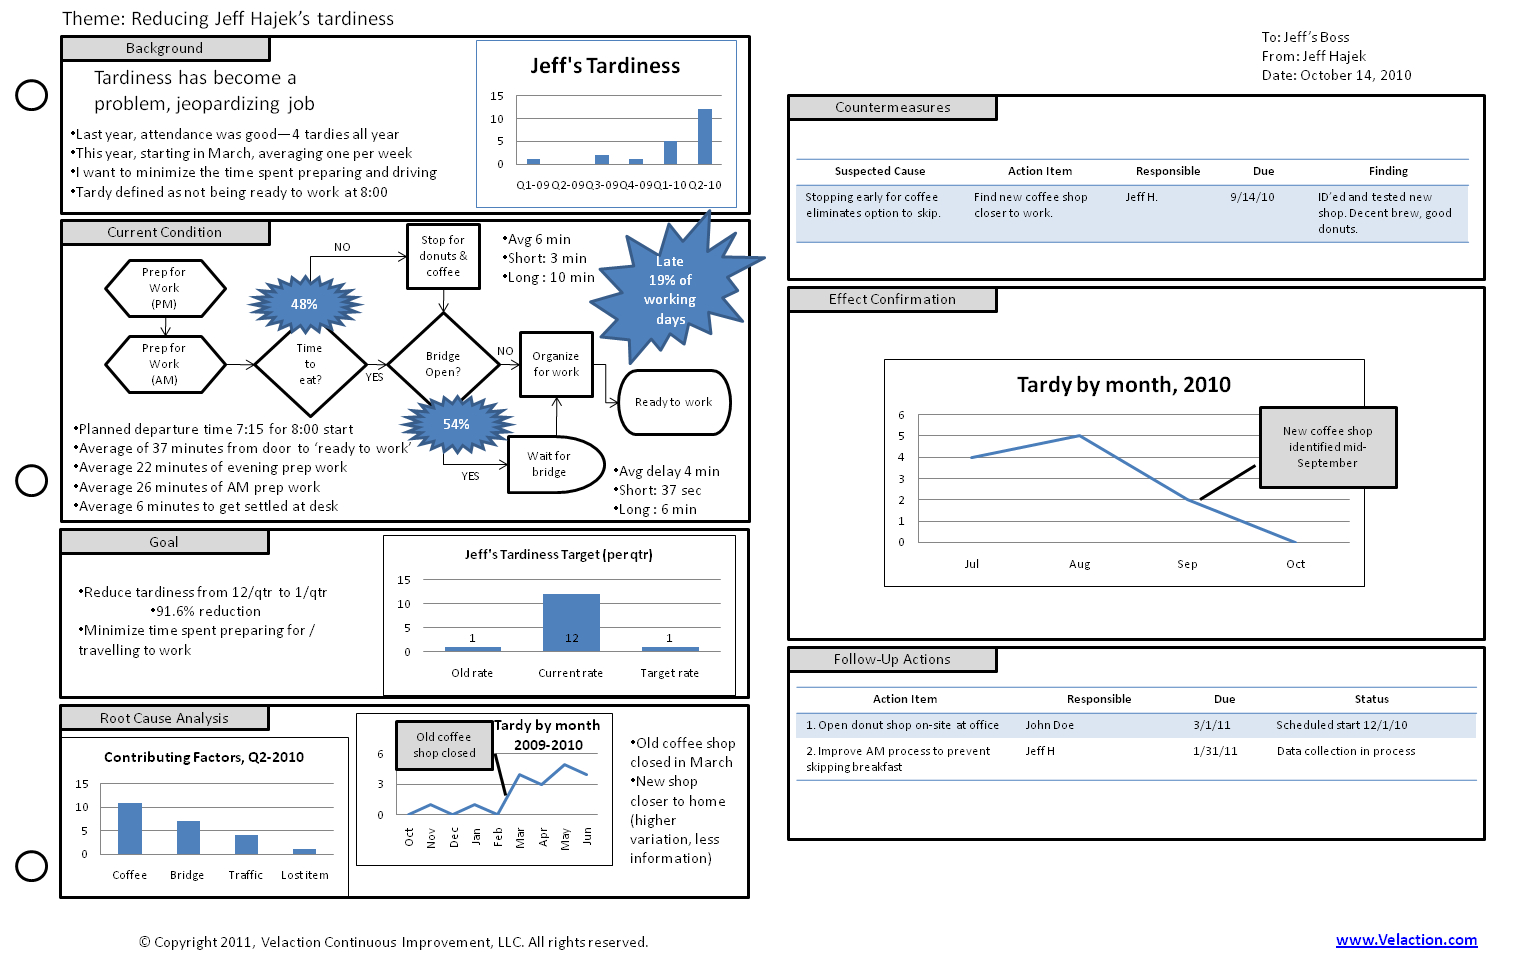 A3 Report Template Xls ] – A3 Report Template For Lean A3 Pertaining To 8D Report Template Xls